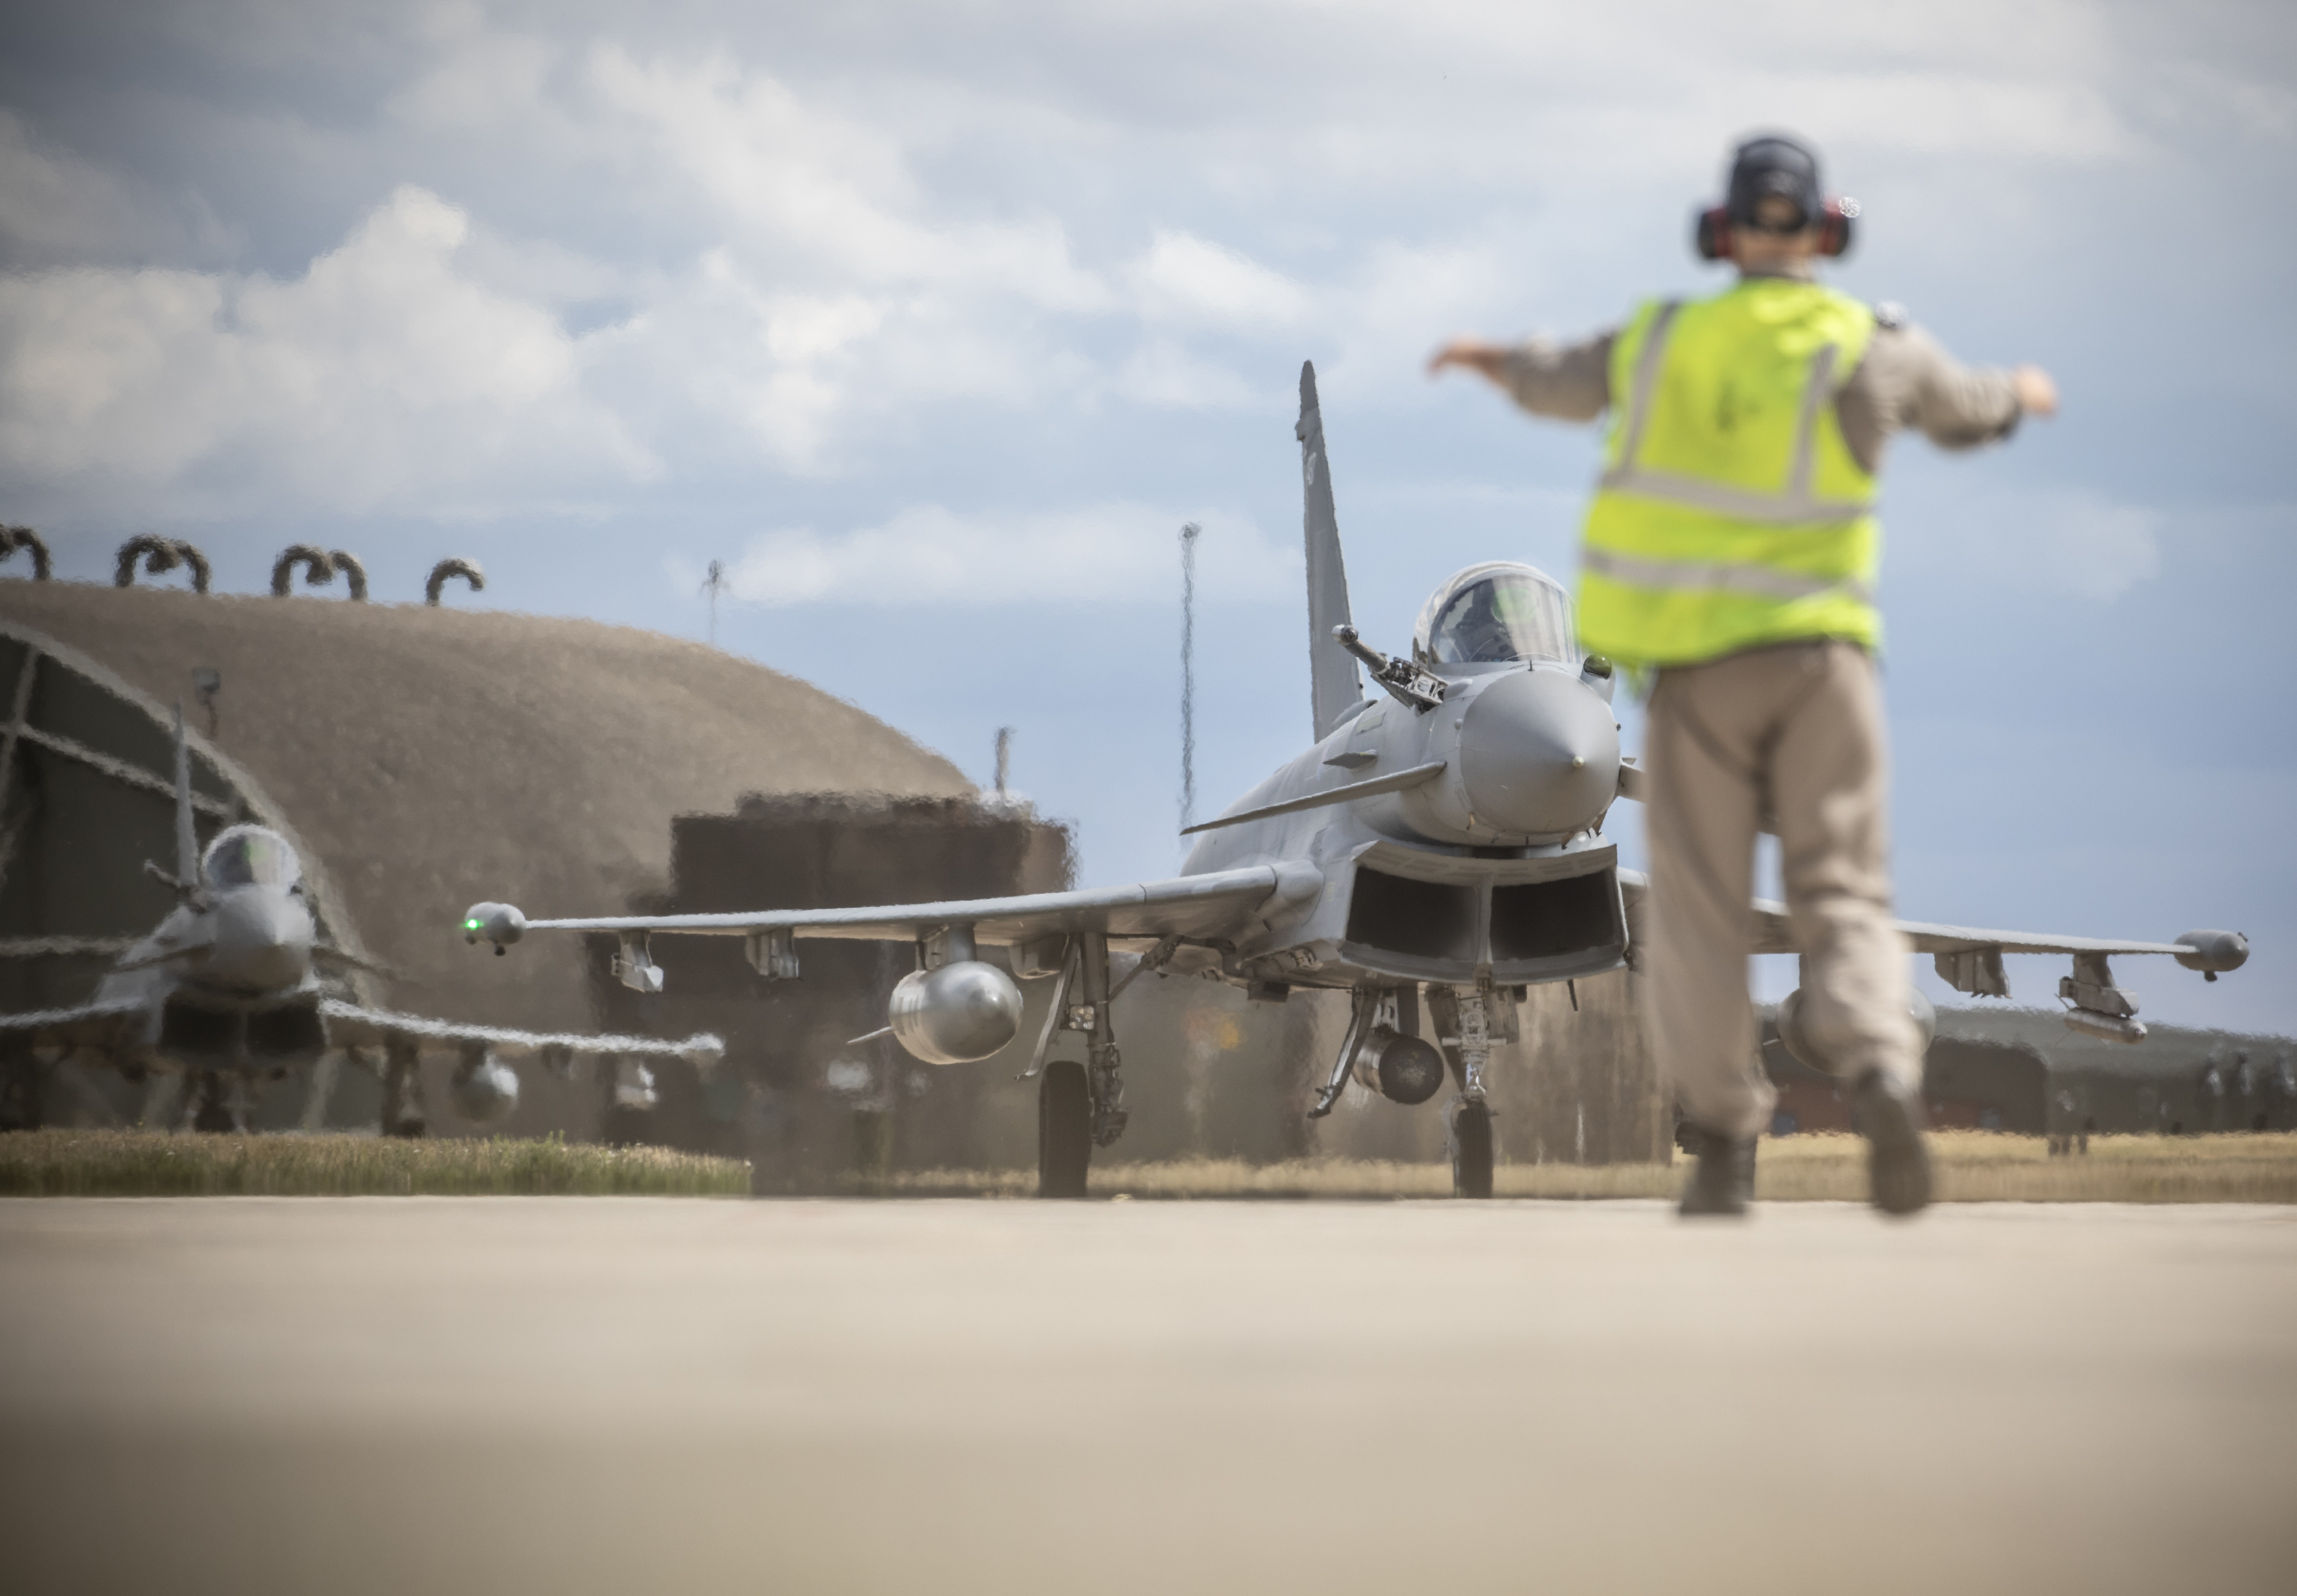 Image shows RAF aviator guiding Typhoons on the airfield.